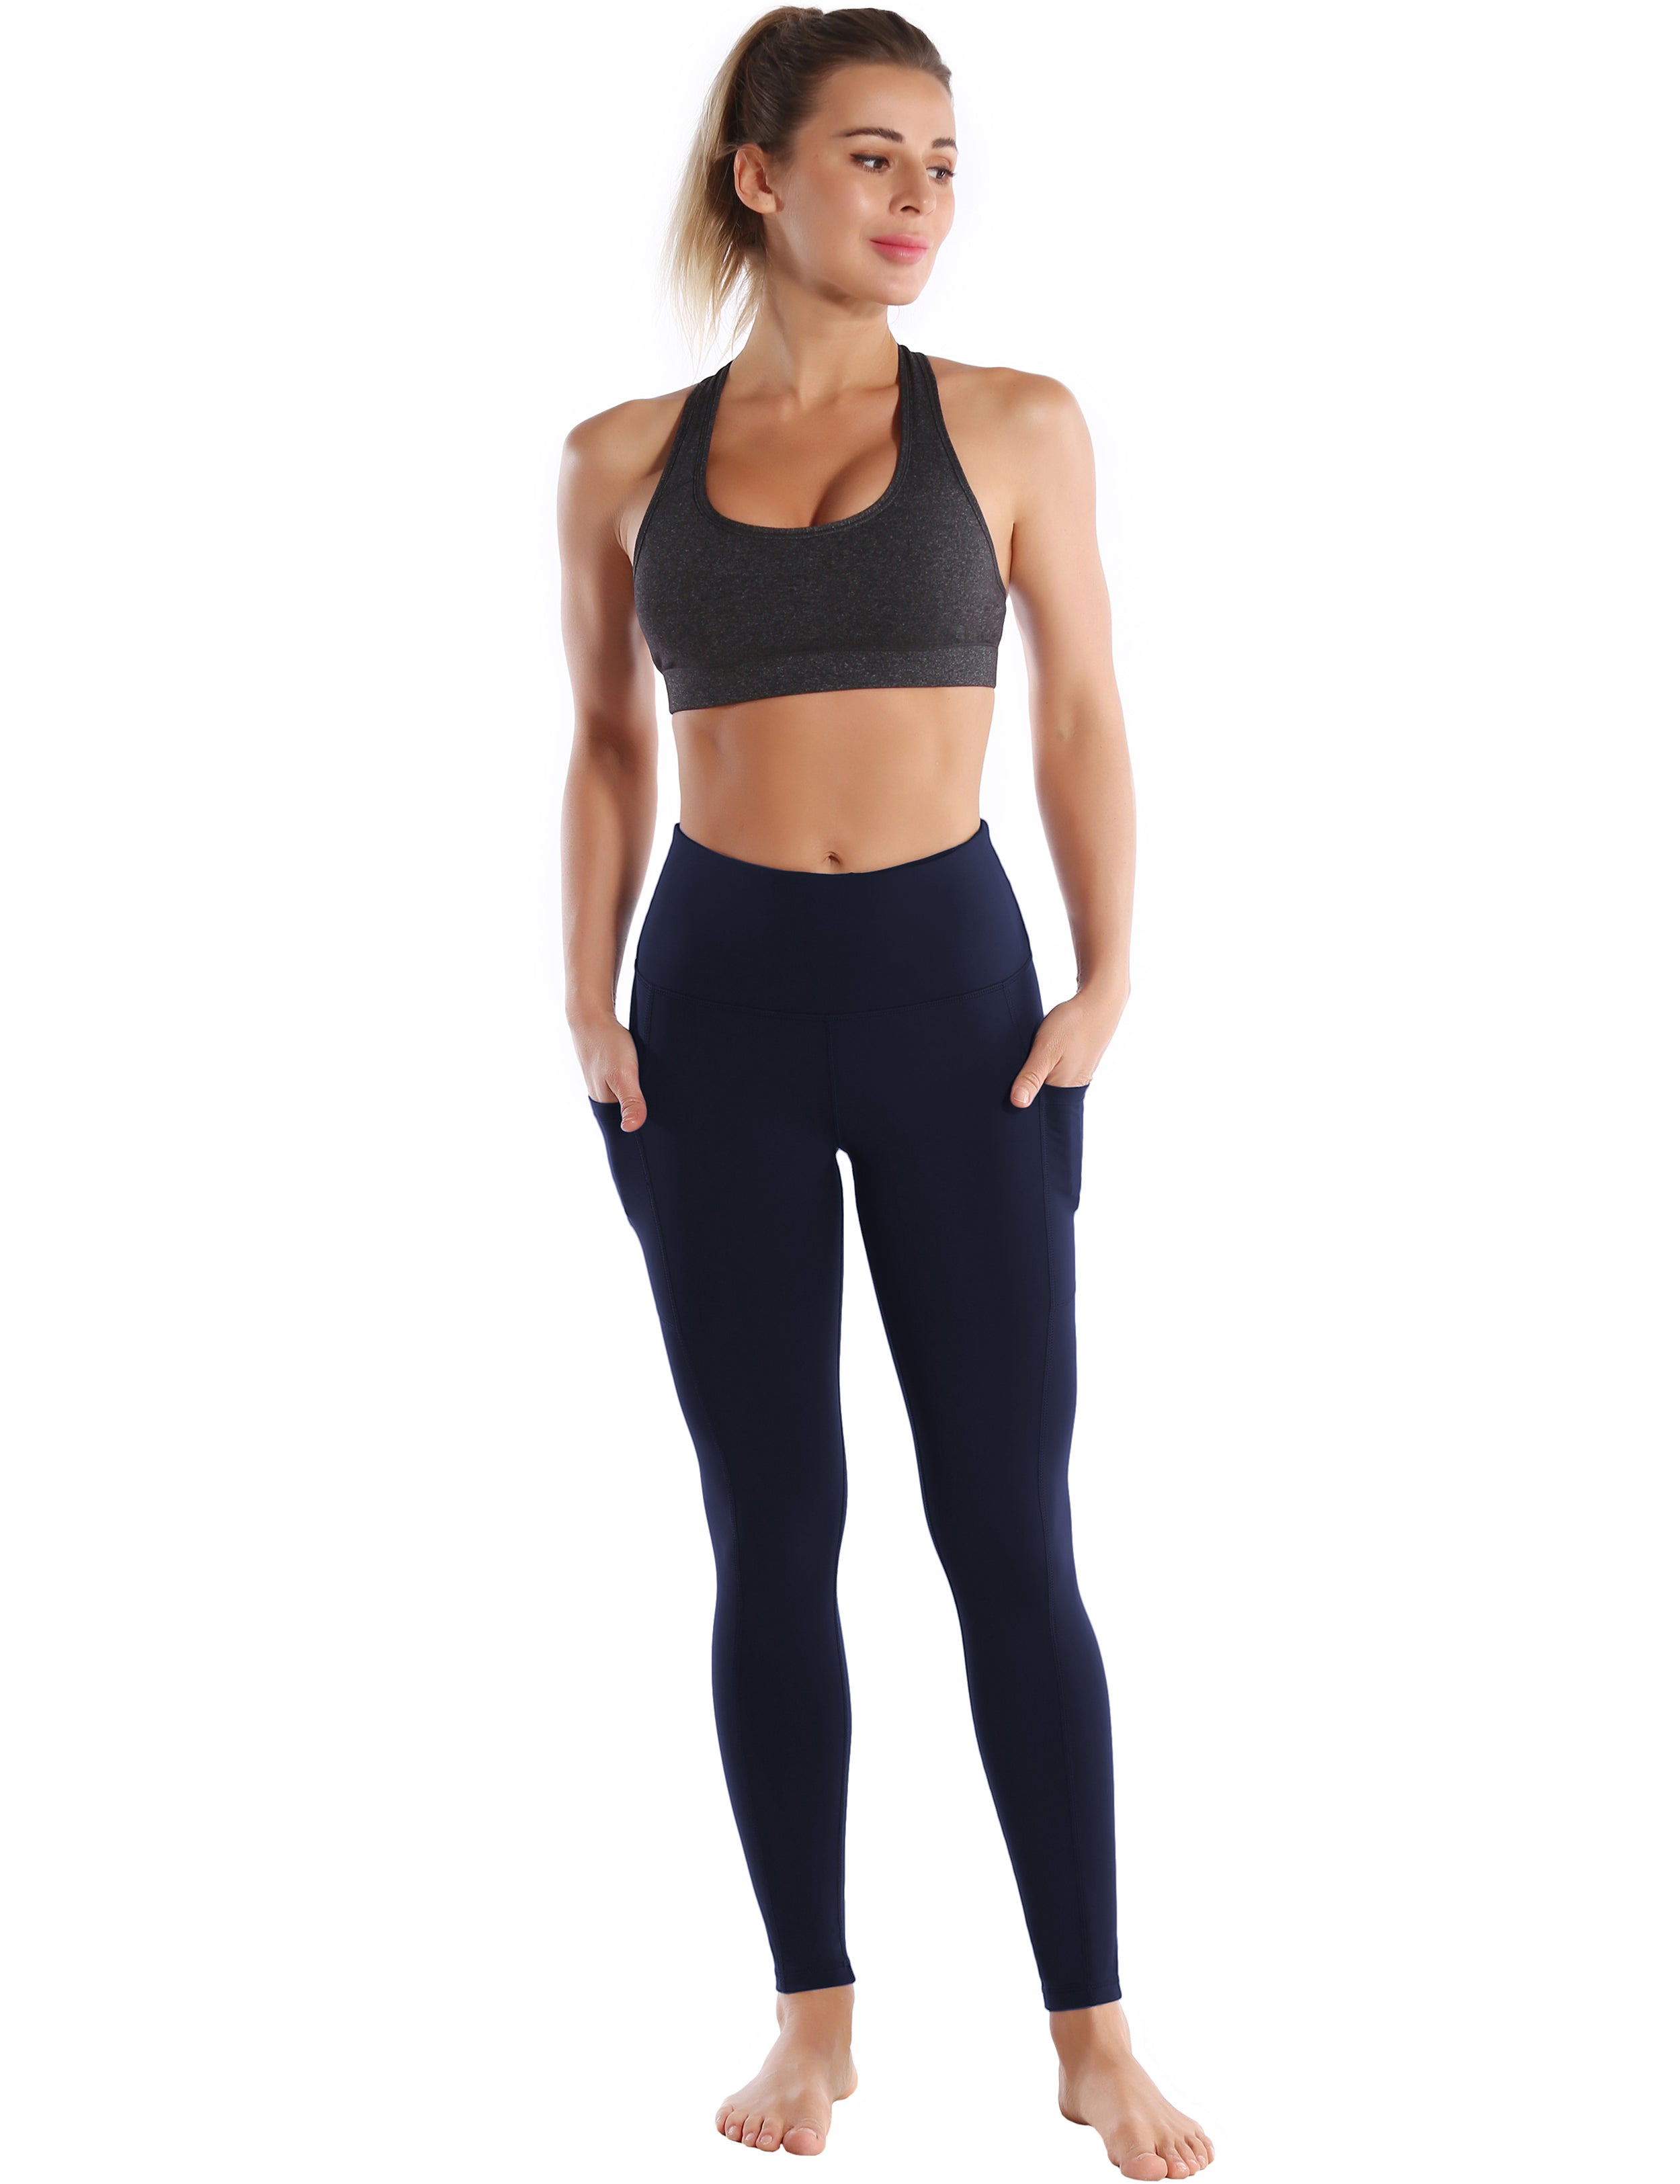 Hip Line Side Pockets Biking Pants darknavy Sexy Hip Line Side Pockets 75%Nylon/25%Spandex Fabric doesn't attract lint easily 4-way stretch No see-through Moisture-wicking Tummy control Inner pocket Two lengths